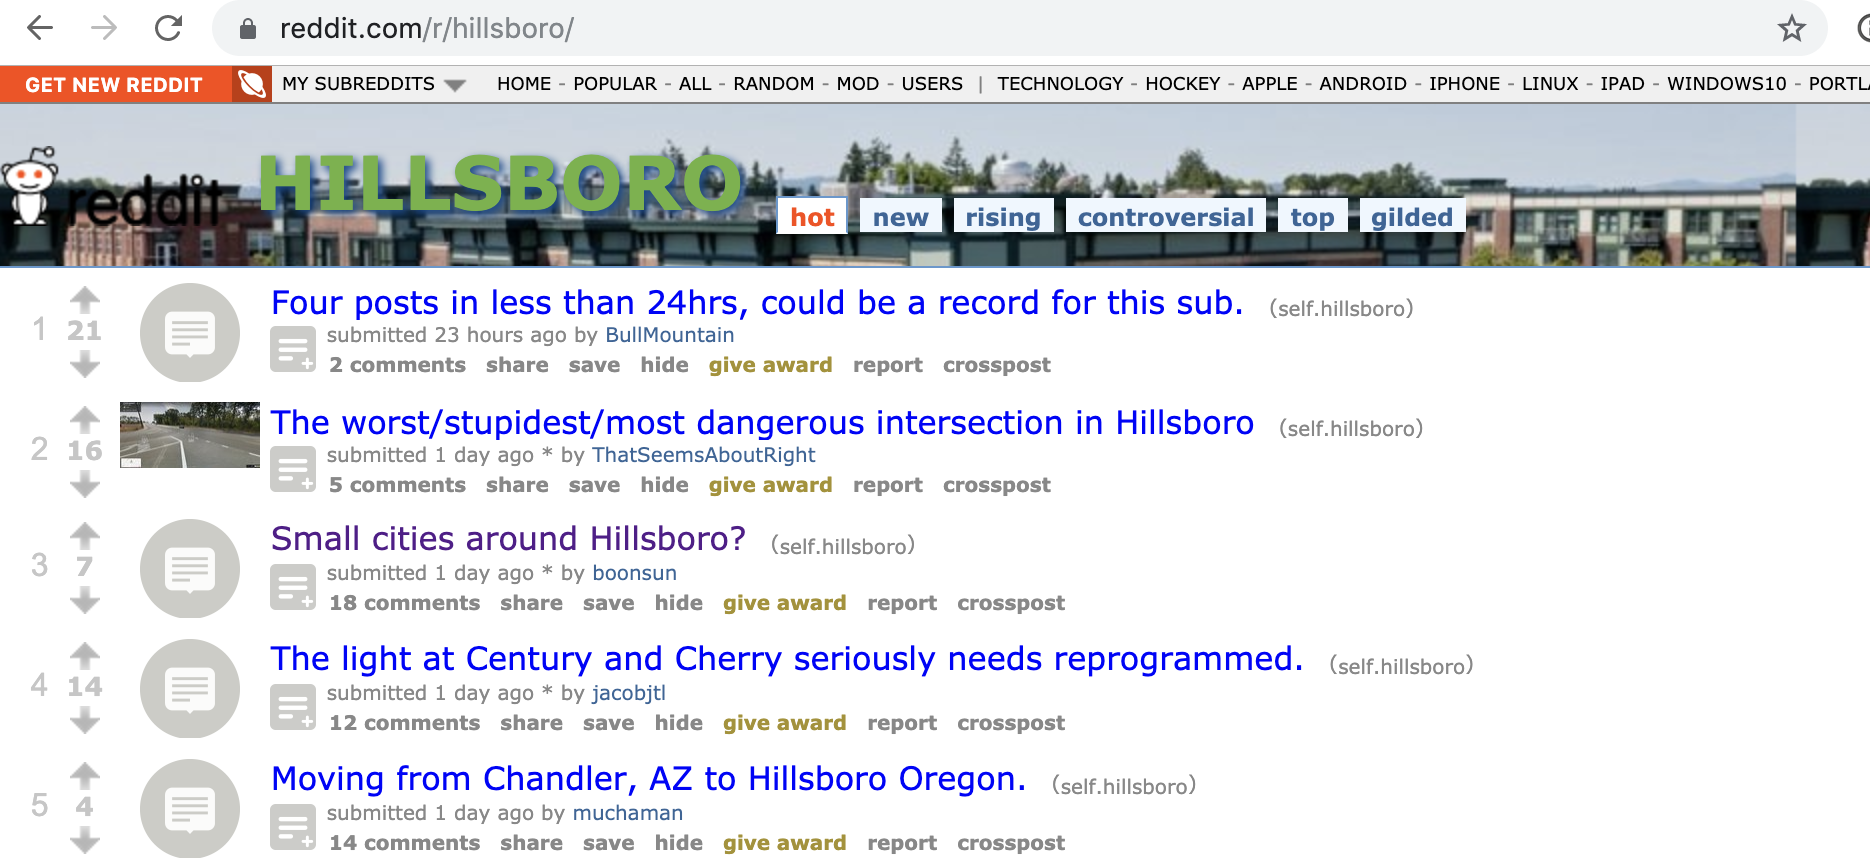 The Journalists Guide to Keeping Track of Local Subreddits